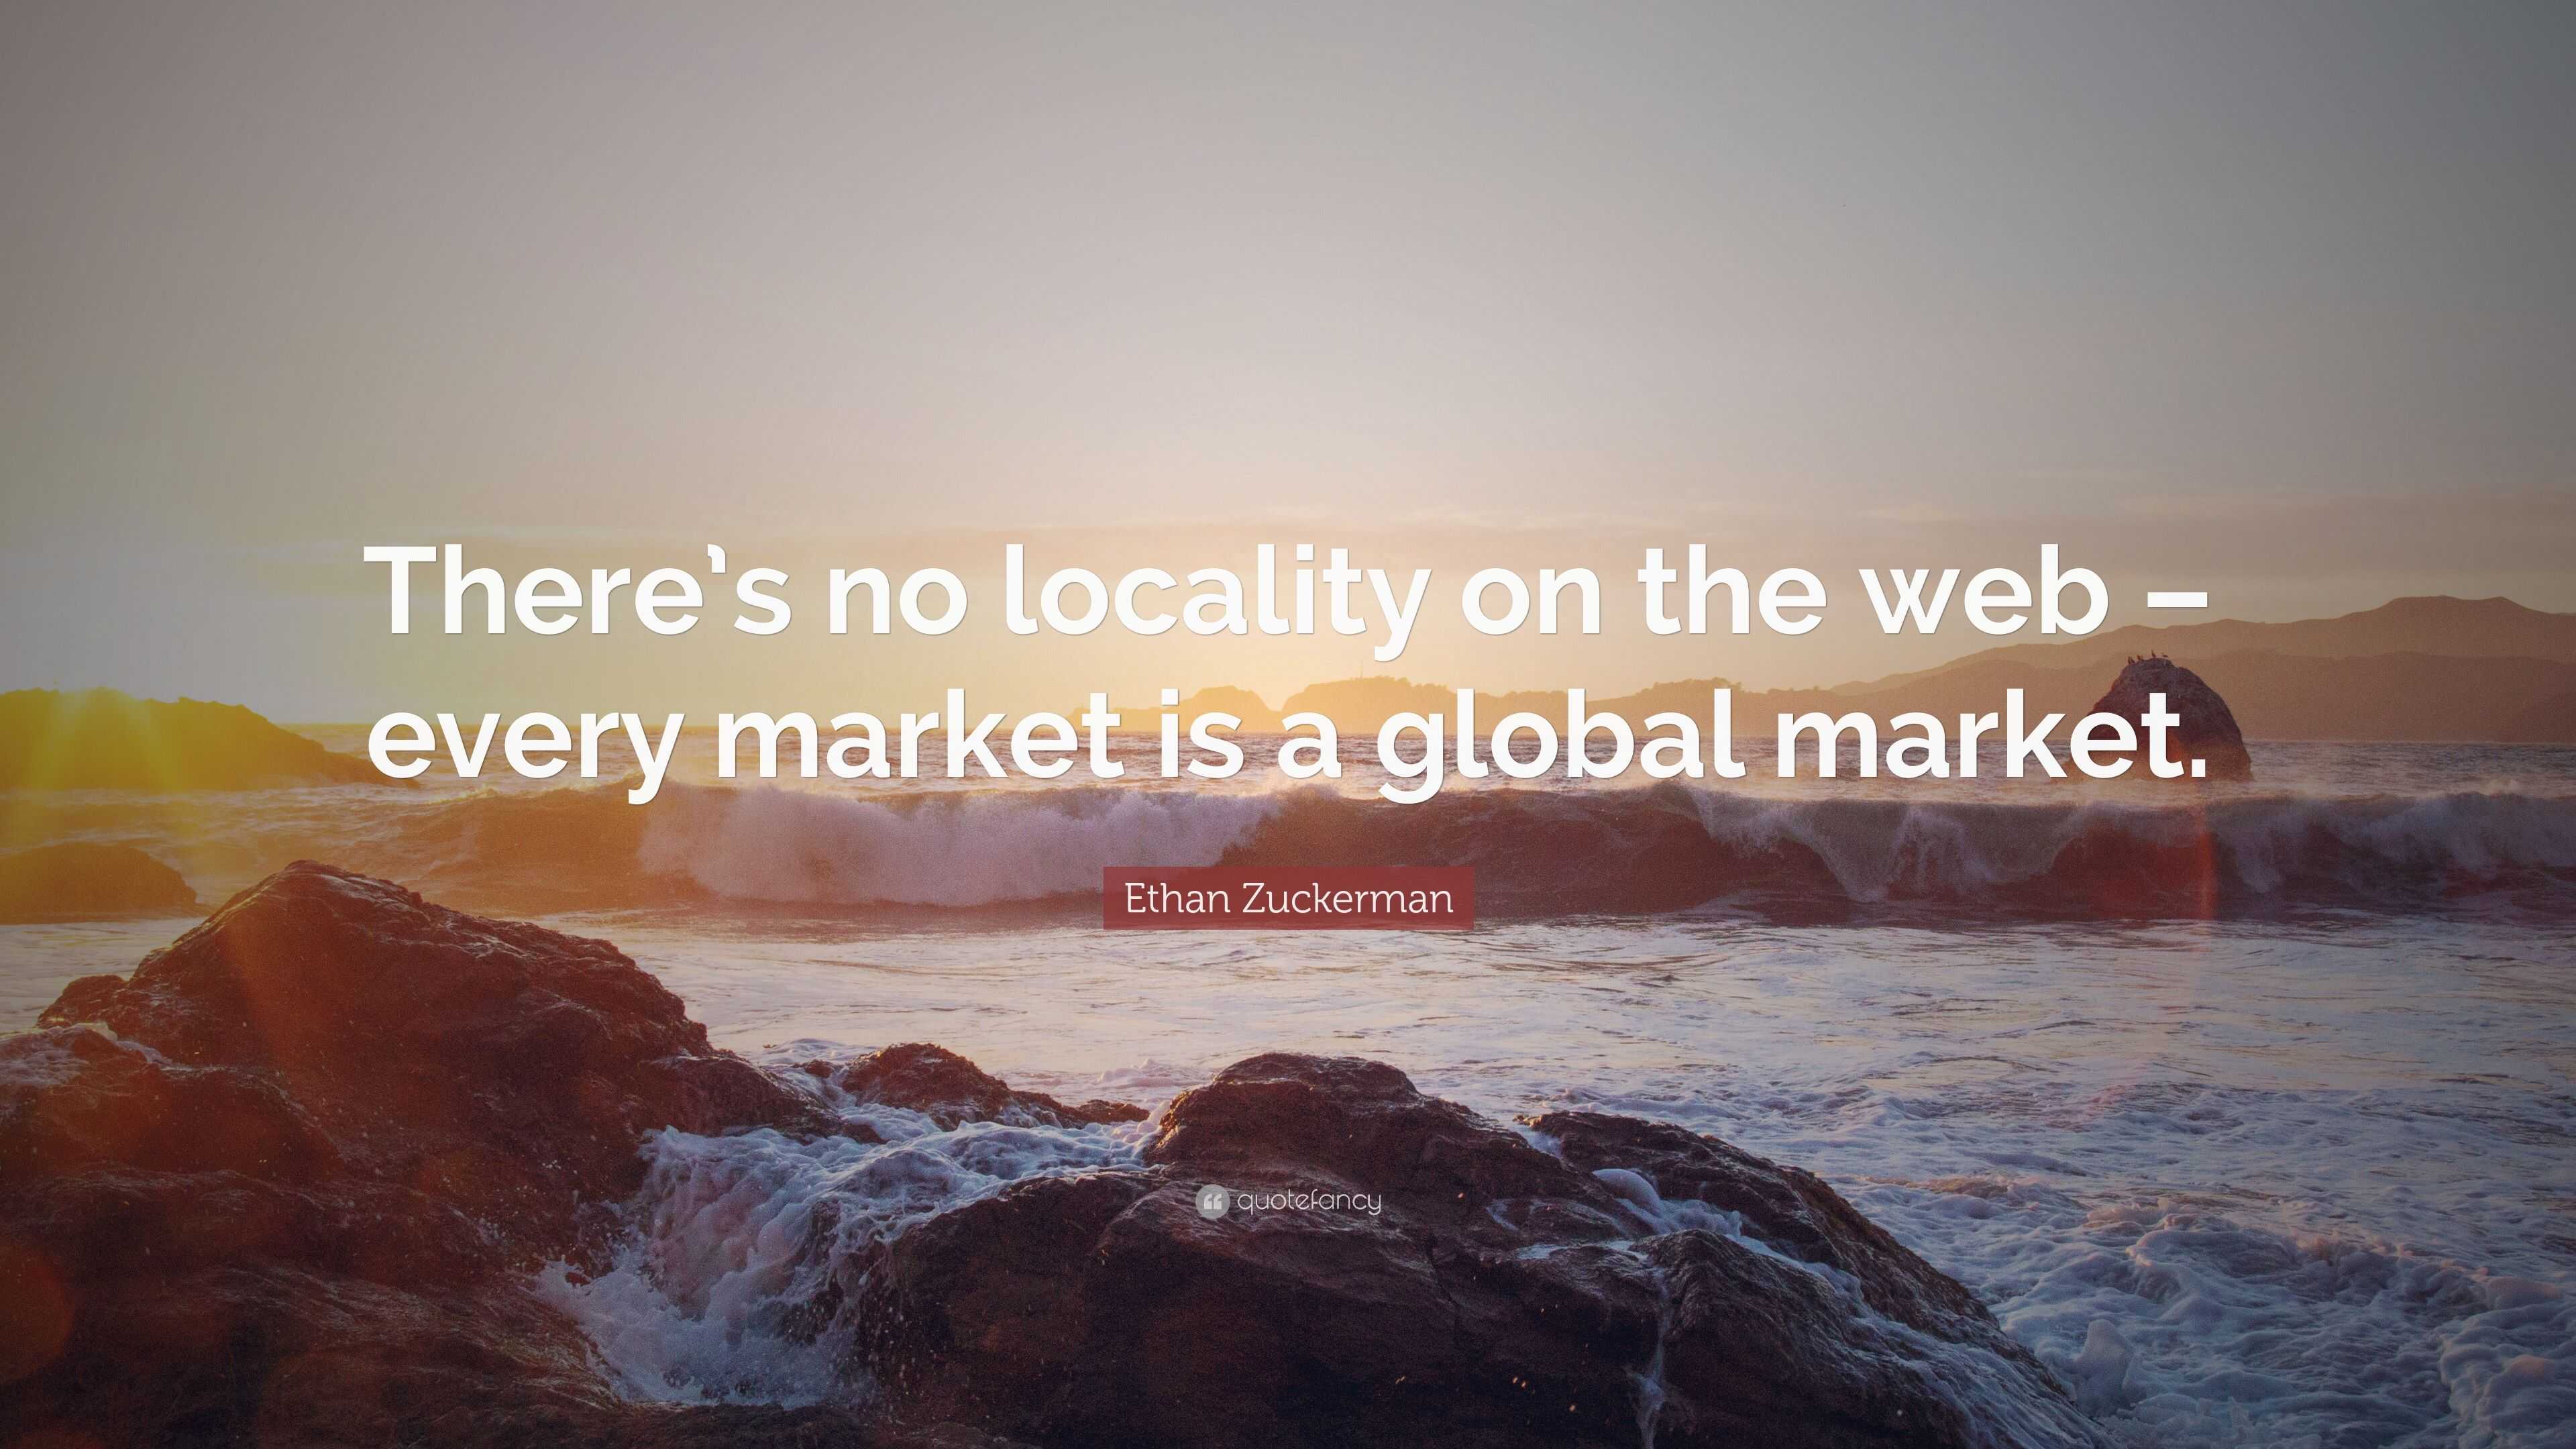 https://quotefancy.com/media/wallpaper/3840x2160/3082576-Ethan-Zuckerman-Quote-There-s-no-locality-on-the-web-every-market.jpg